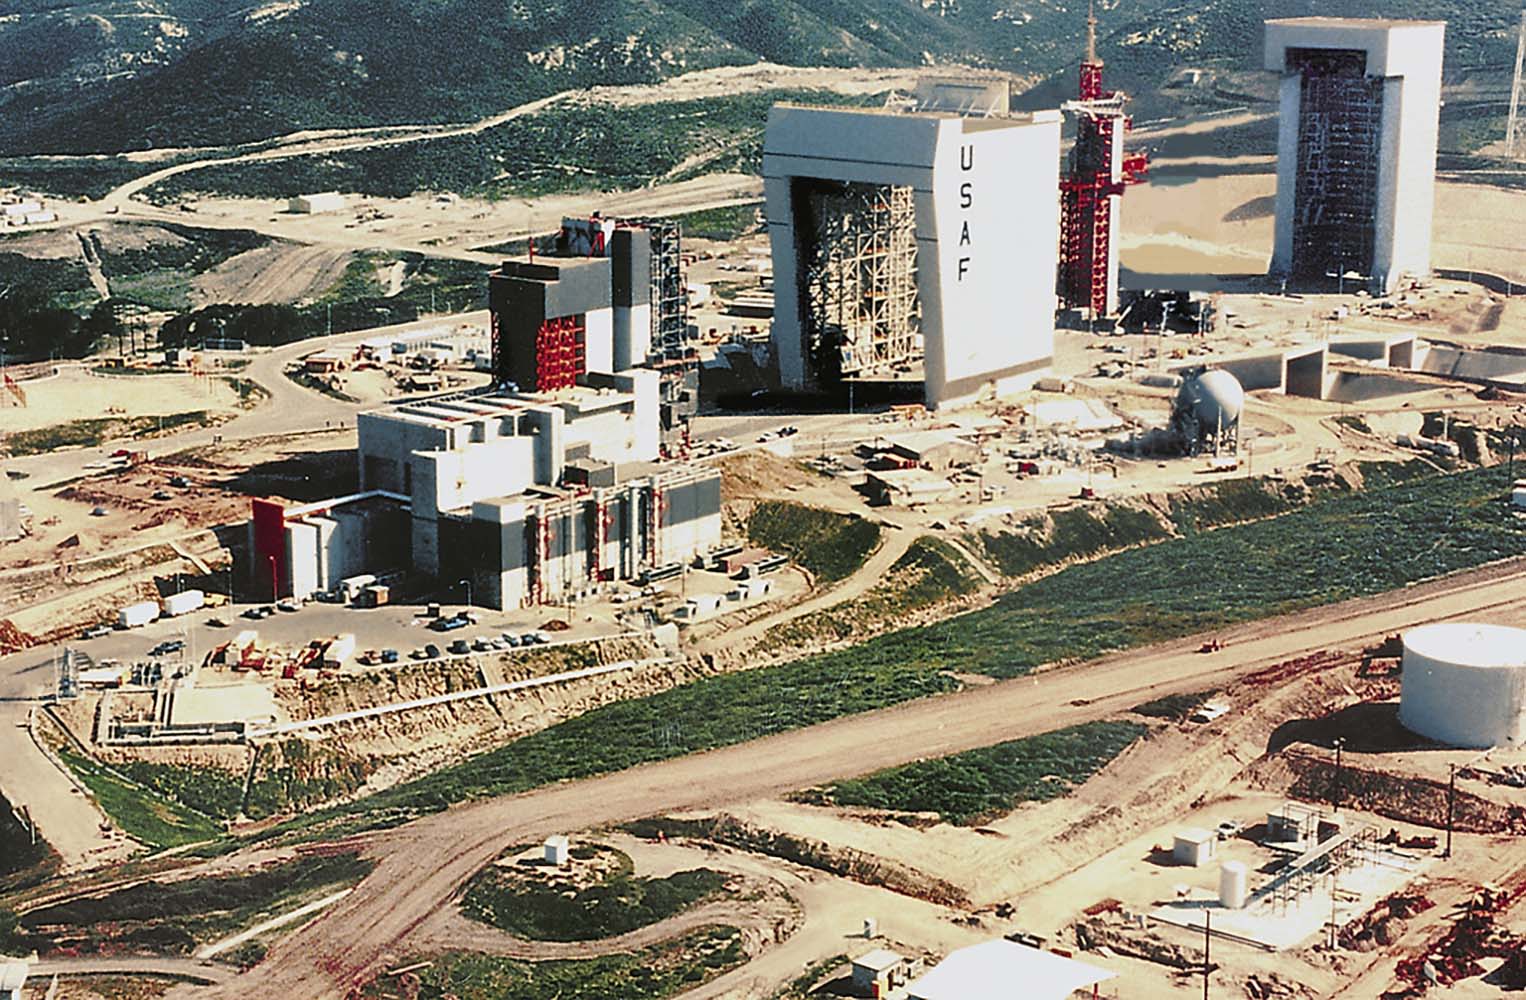 Launch pad and facility at Vandenburg Air Force Base in California - taken in 1986.